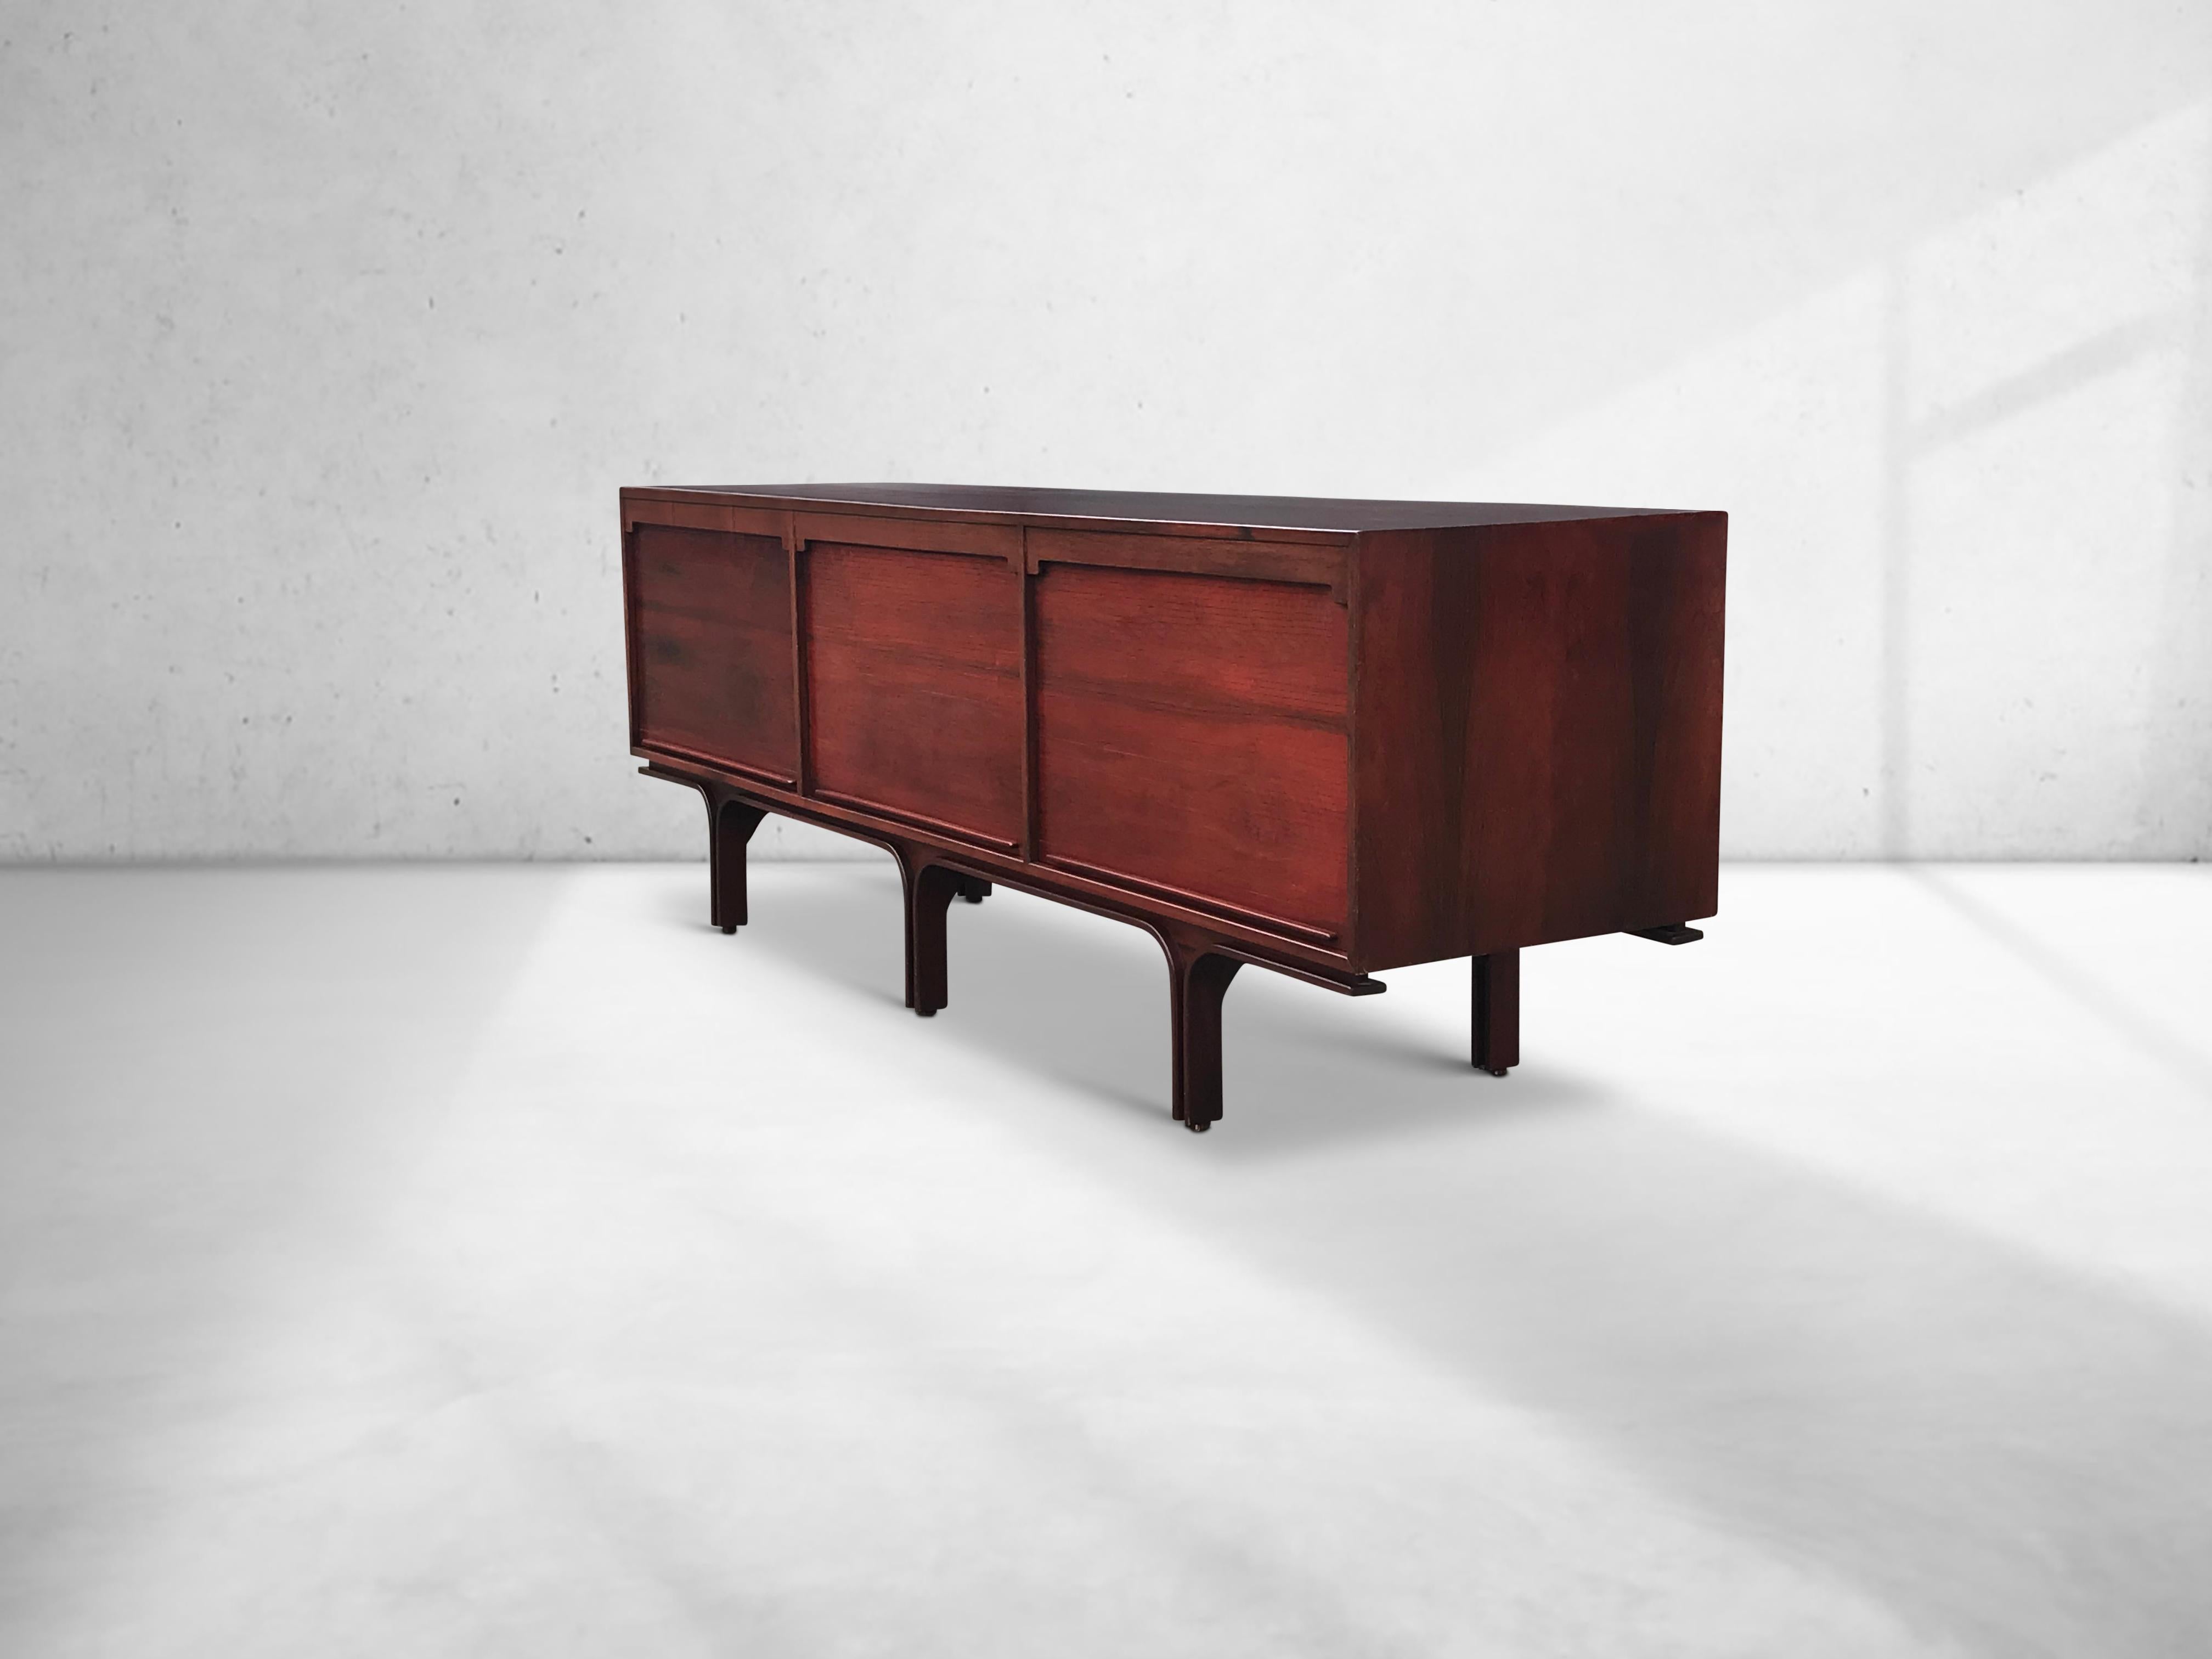 Rosewood Model 503 rosewood credenza by Gianfranco Frattini for Bernini 1960s